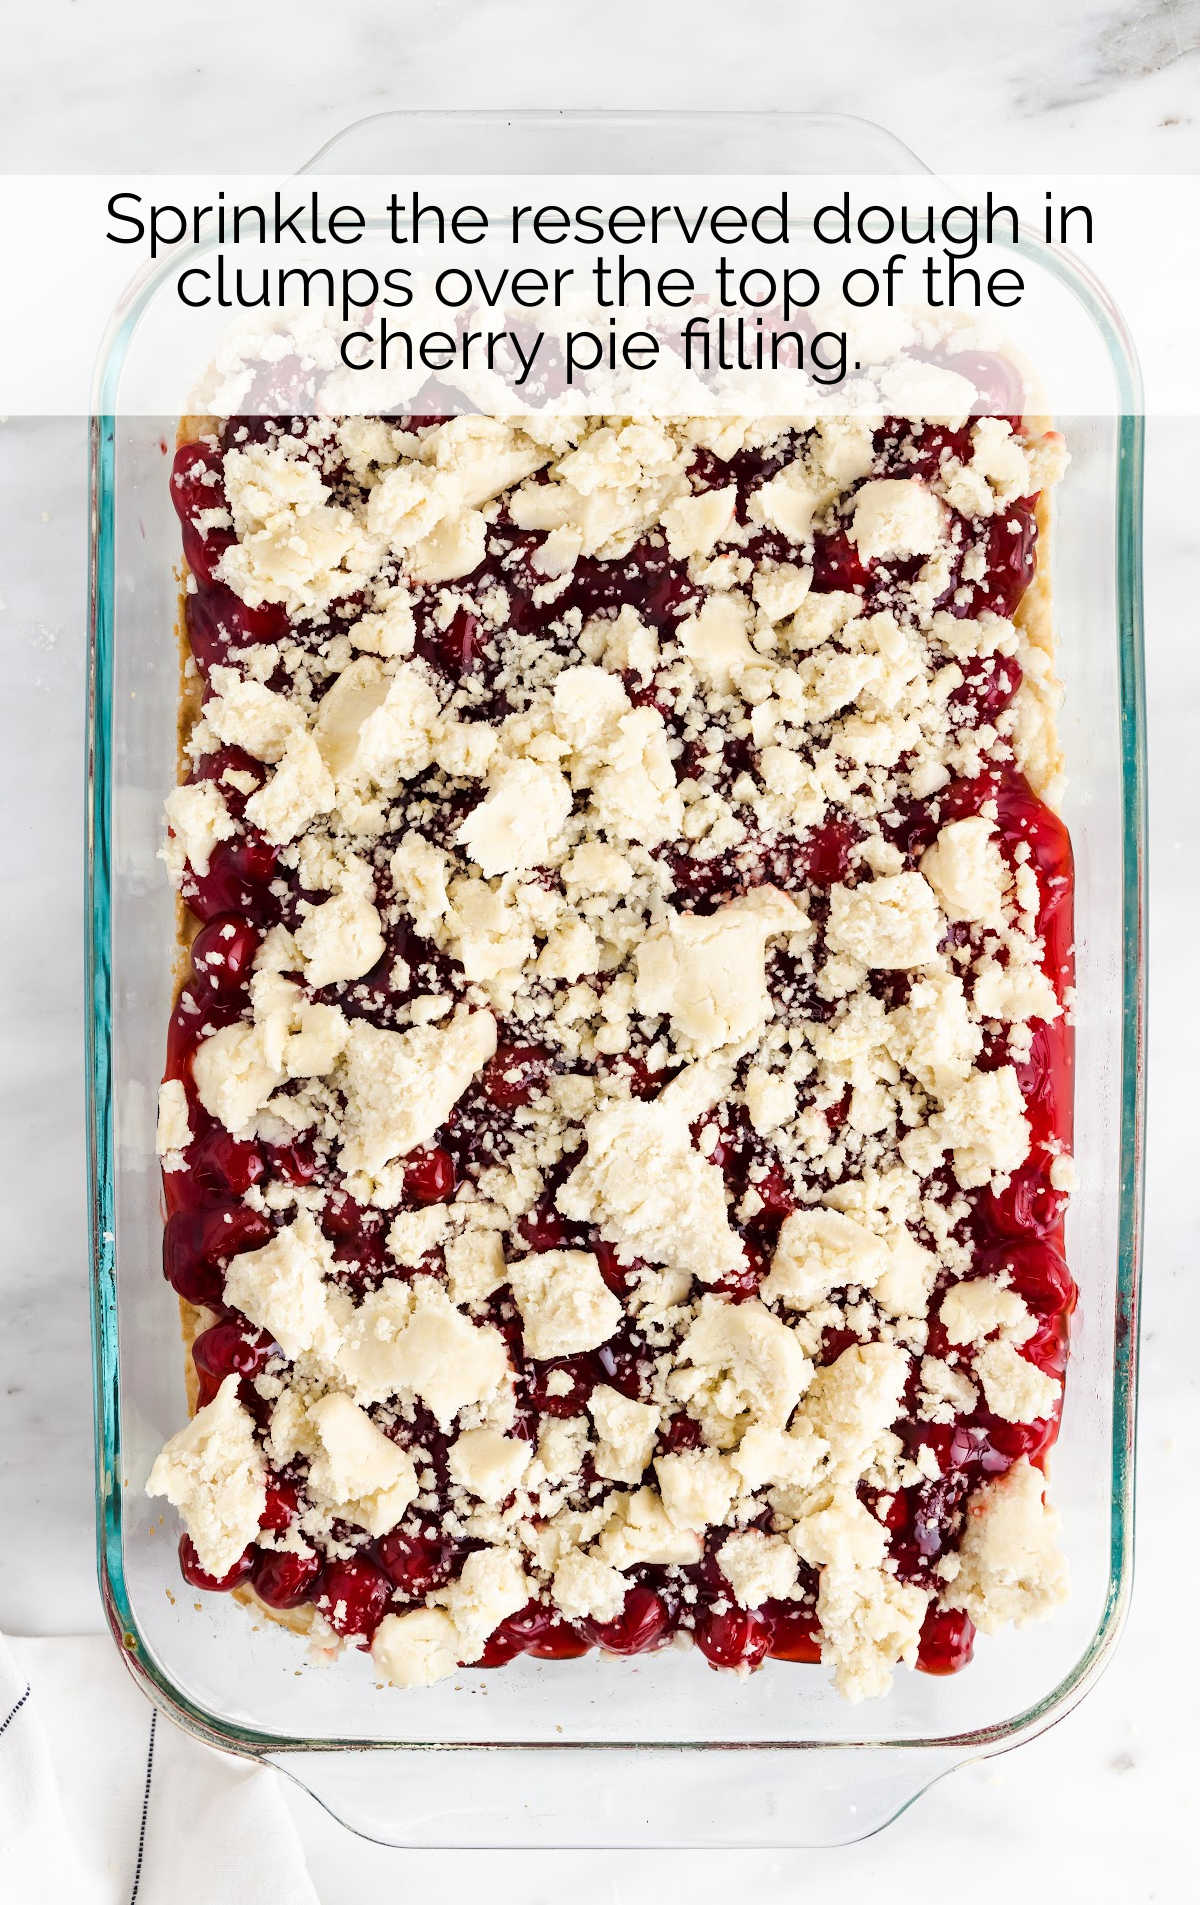 dough crumbled on top of the cherry pie filling